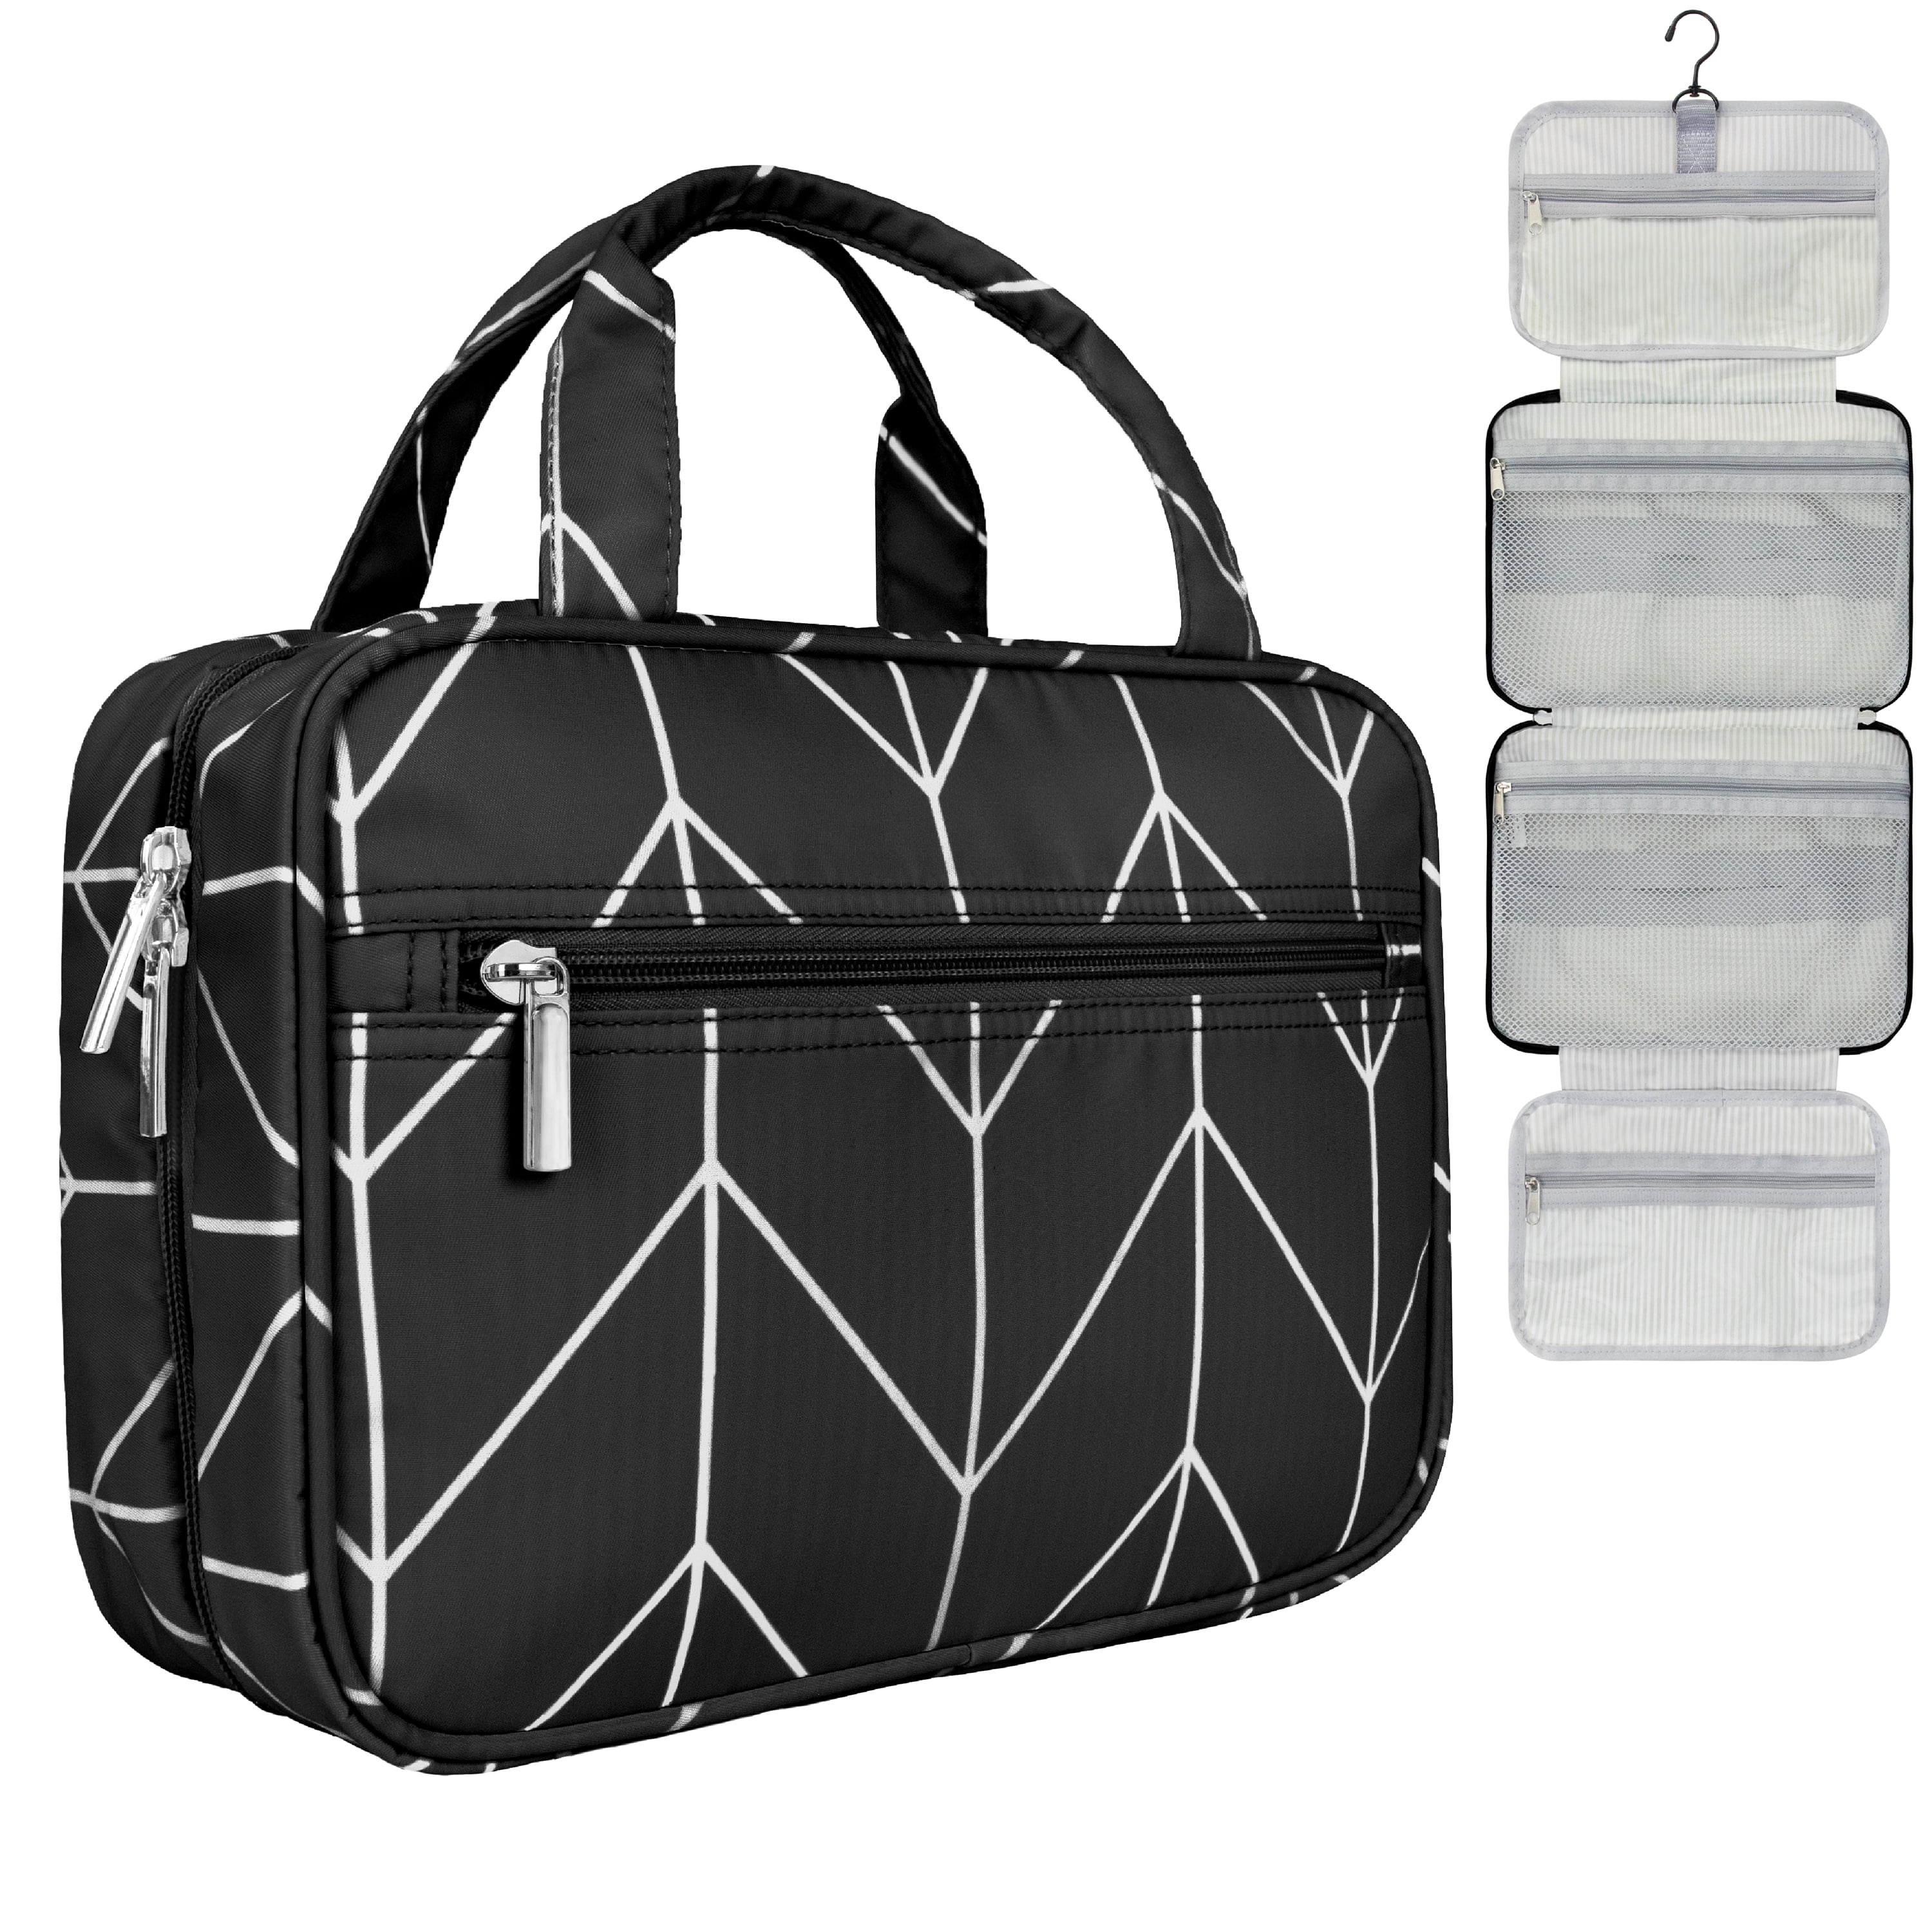 Large Toiletry Bag Travel Organizer with Hanging Hook, Water-resistant  Makeup Cosmetic Bag Travel Case for Accessories, Shampoo, Toiletries,  Personal Hygiene Items- Black Plaid 